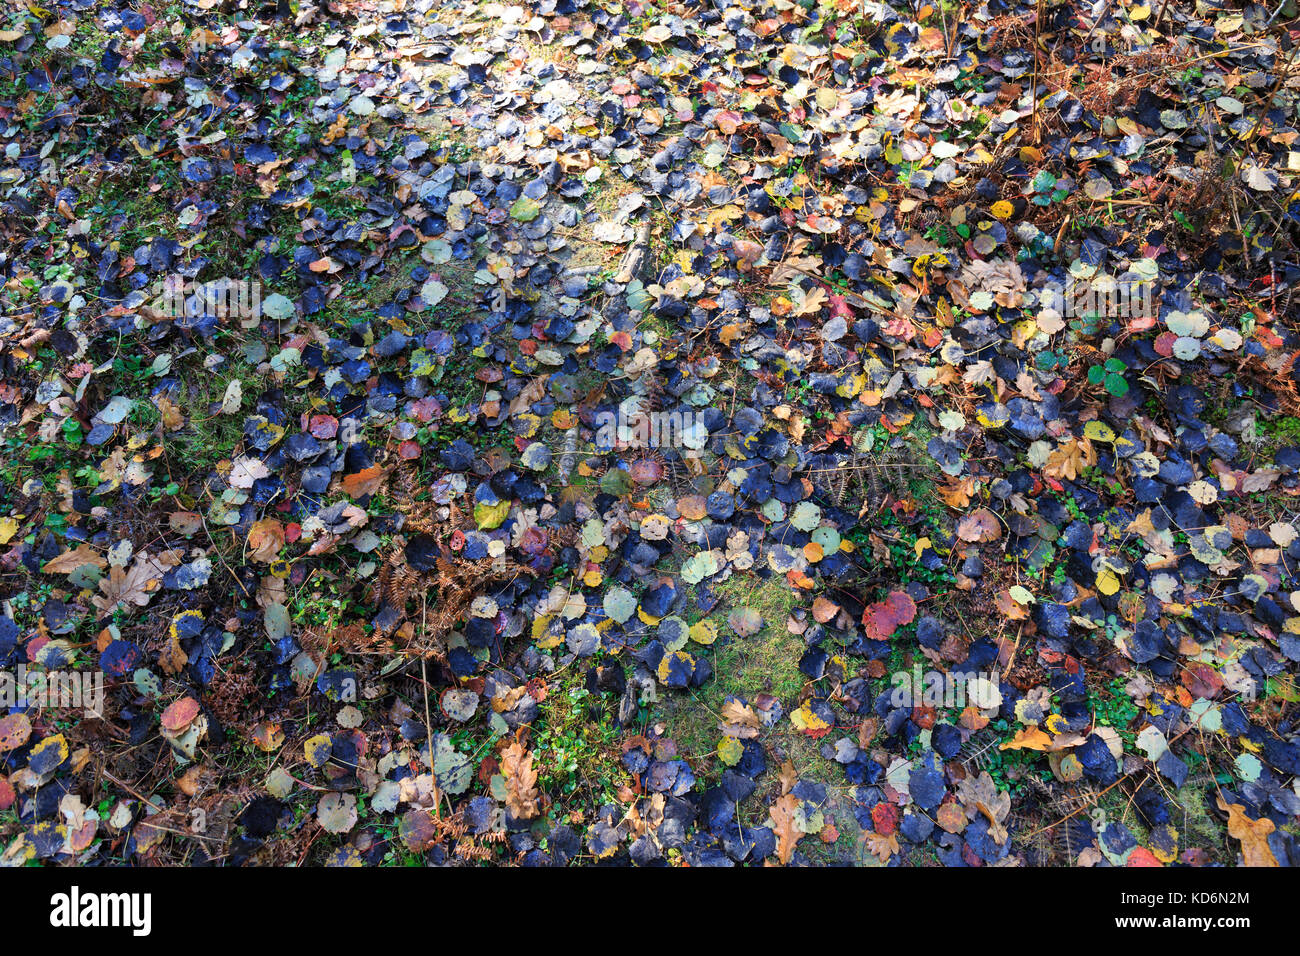 Colourful bed of Autumn fallen leaves covering the ground in a forest, England Stock Photo